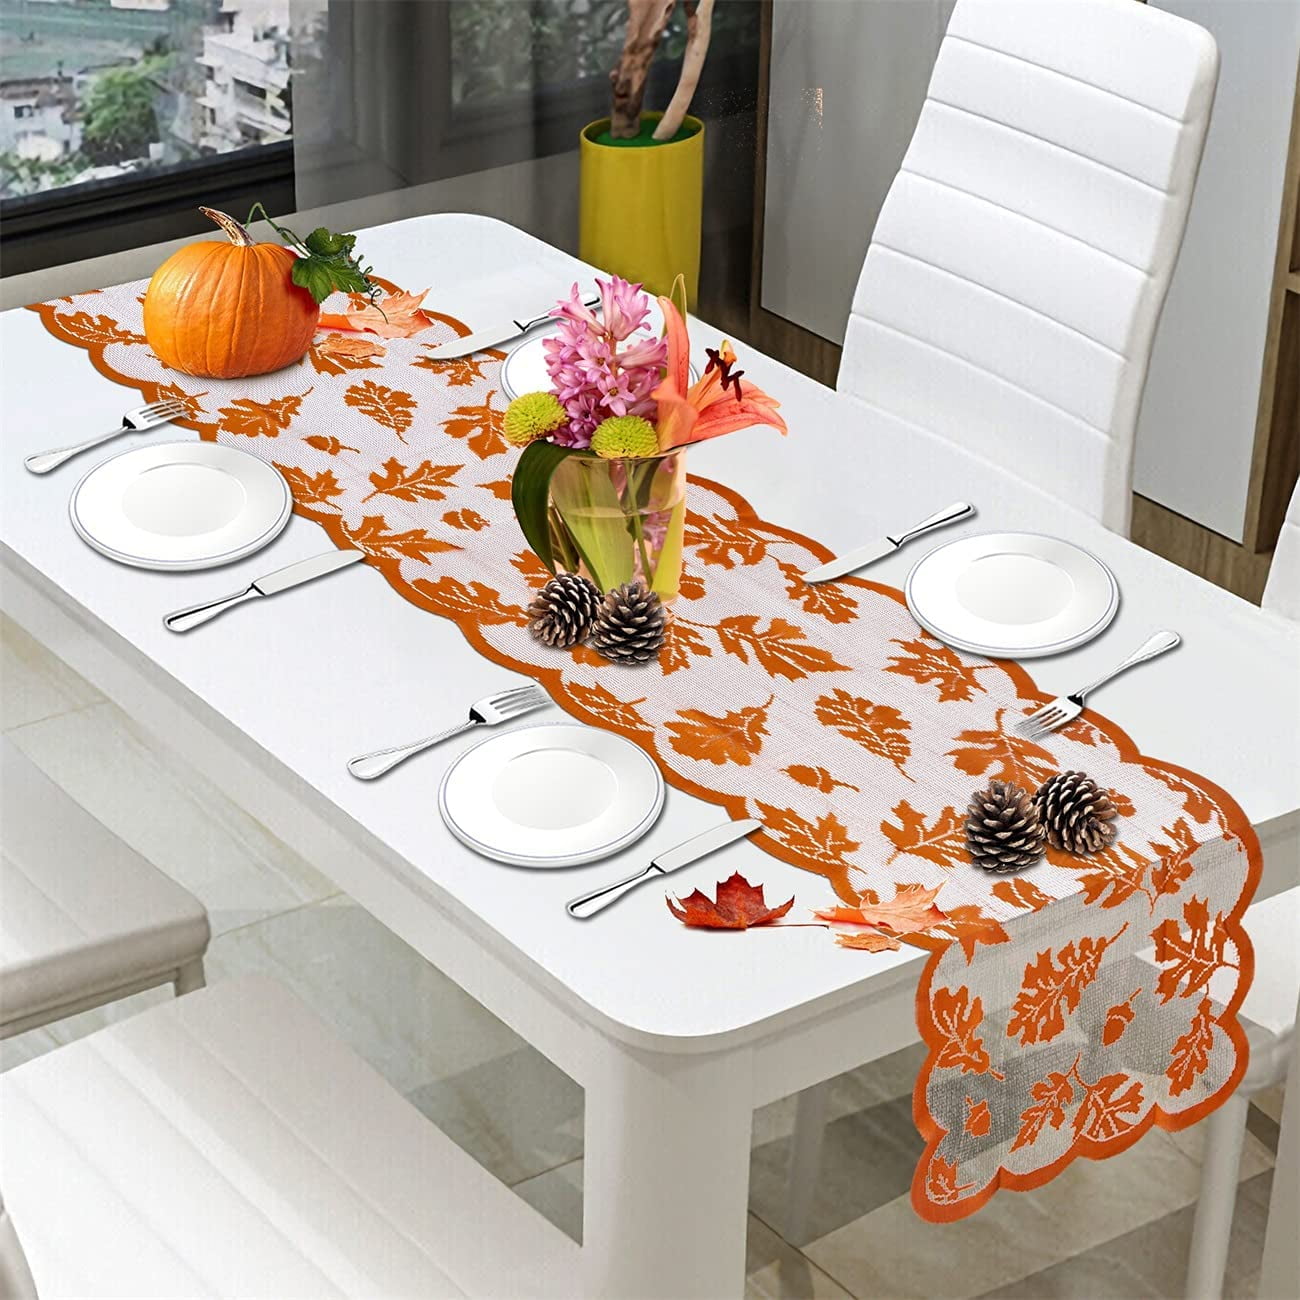 Pudodo Linen Maple Leaves Table Runner Fall Thanksgiving Farmhousse Fireplace Kitchen Dining Room Home Decoration 